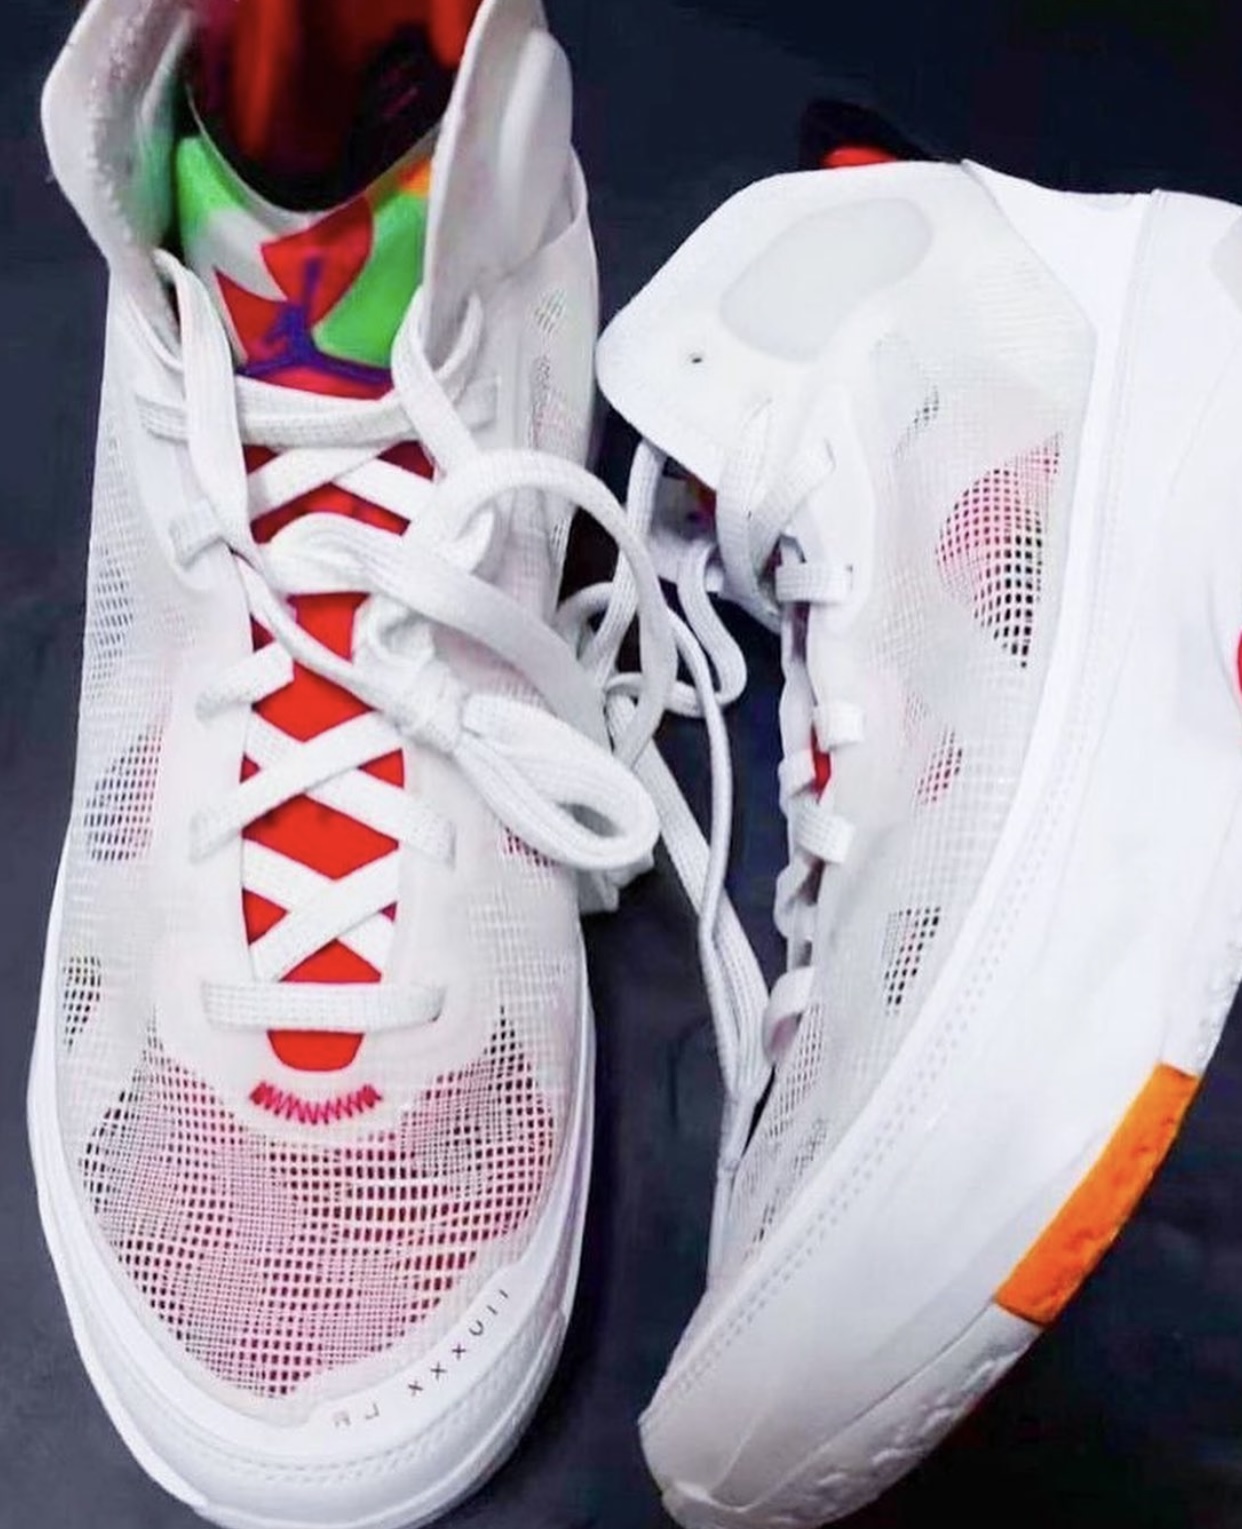 Following a look at the "Super Soaker" edition of the Jordan Why Hare Release Date